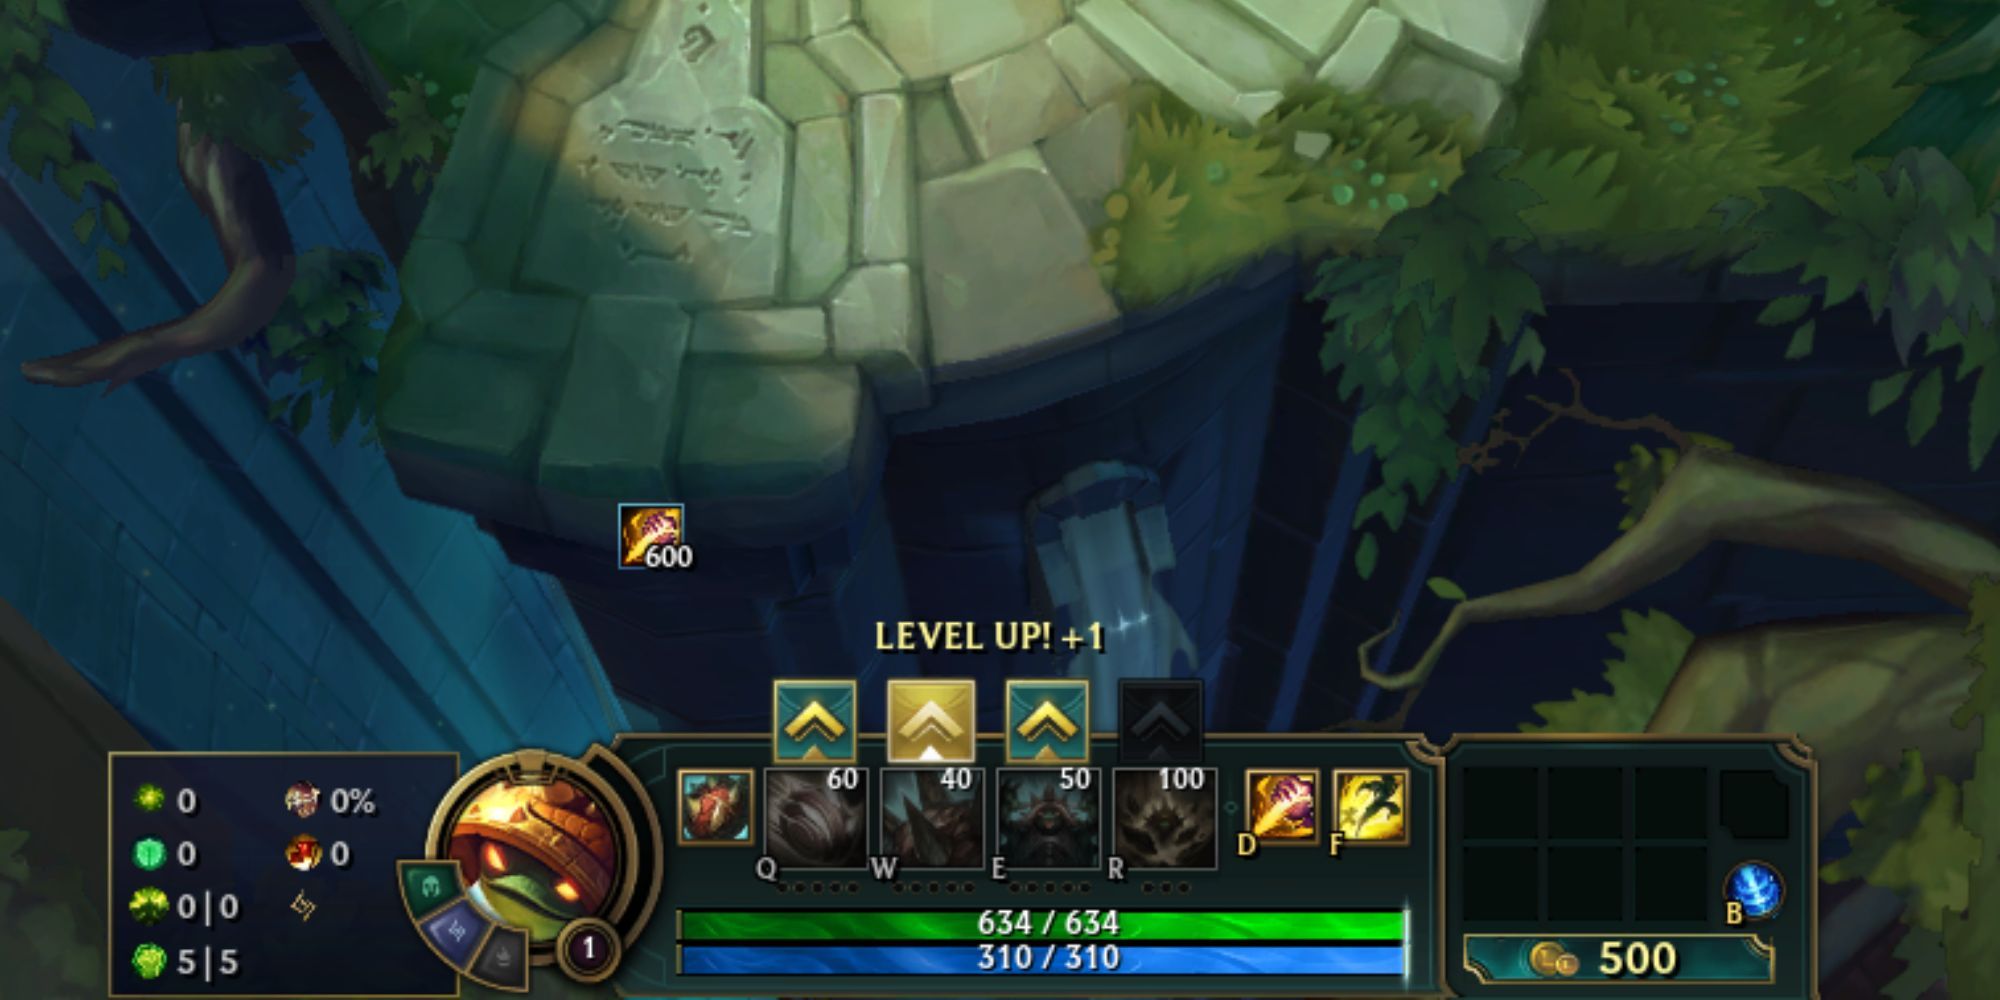 League of Legends Ability Level-Up Suggestions